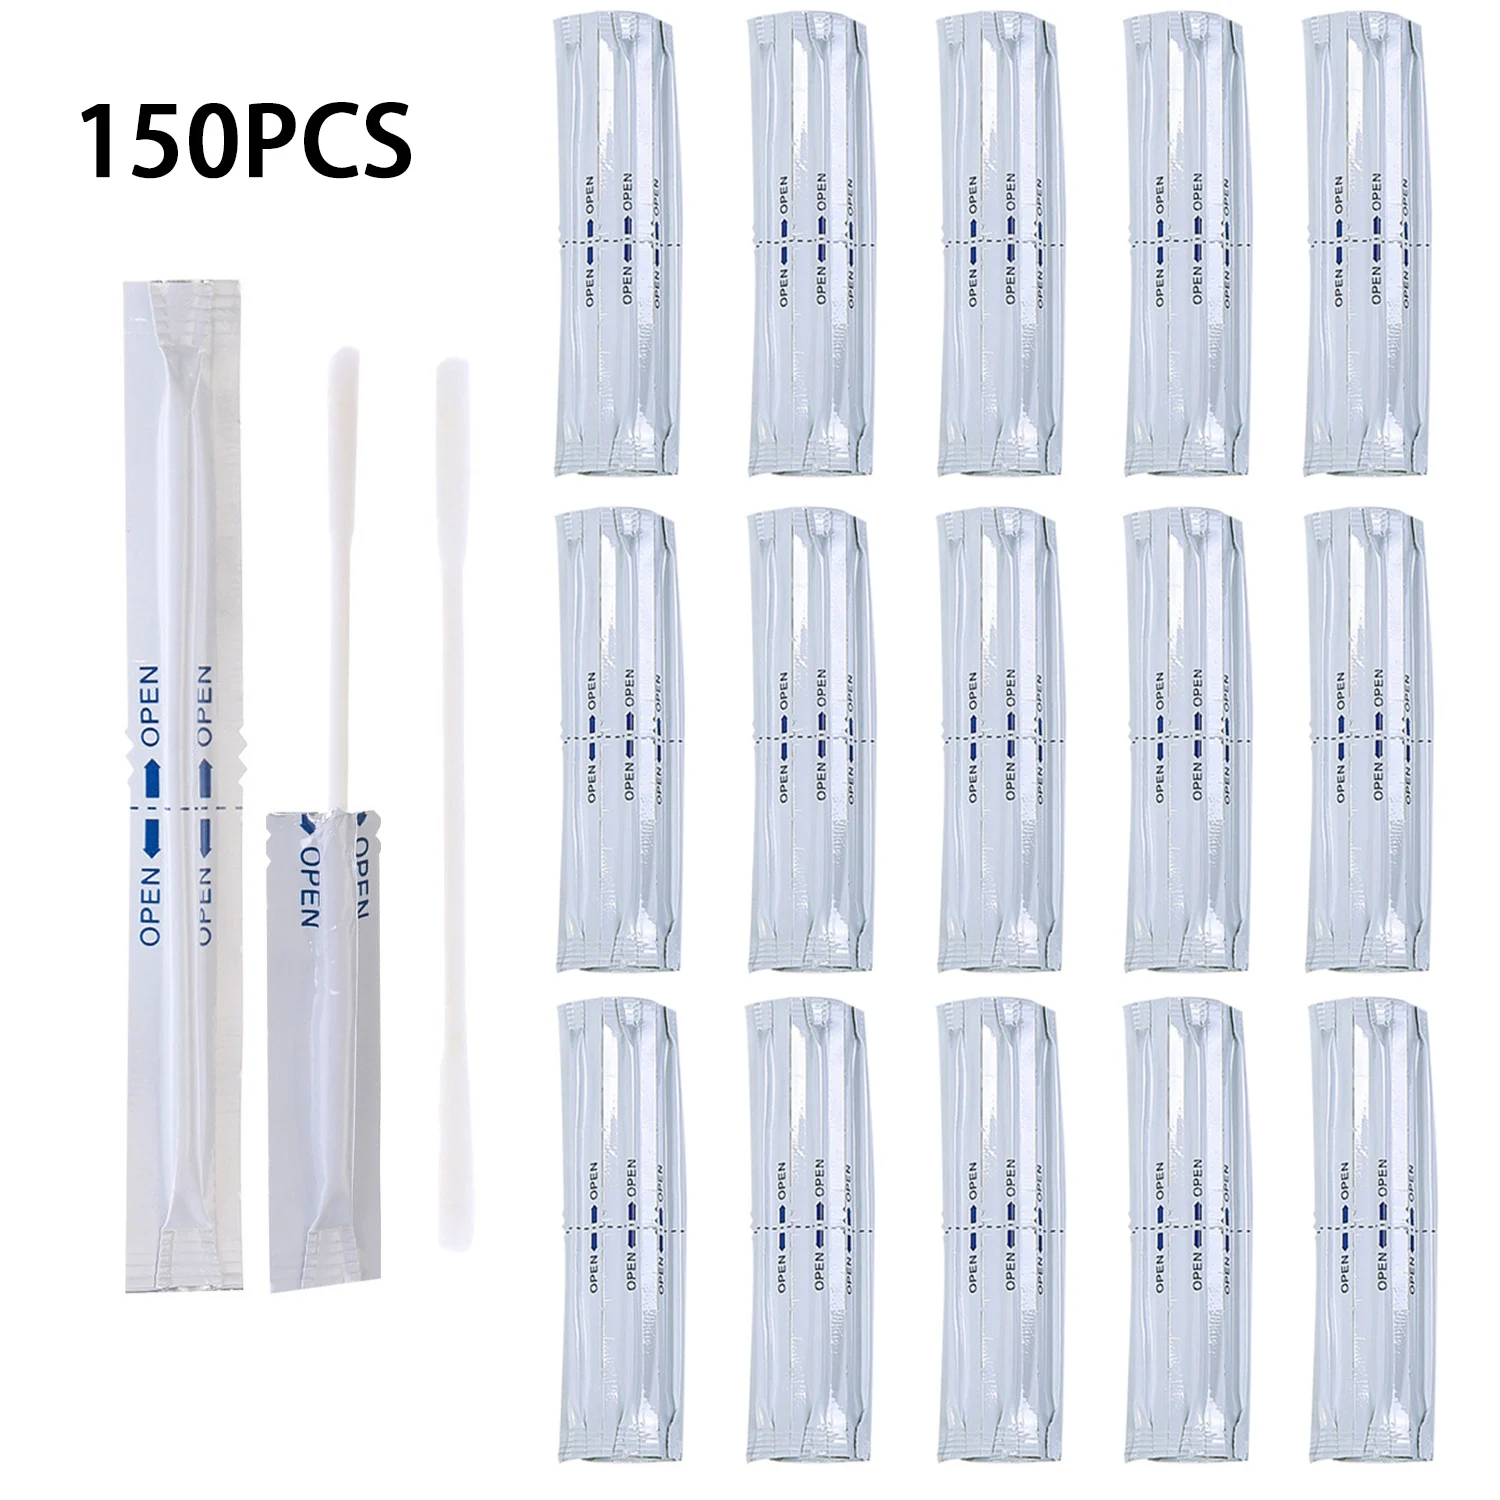 150pcs Alcohol Cotton Swabs Double Head Cleaning Stick For IQOS 3.0 Duo 3 2.4 PLUS LIL/LTN/HEETS/GLO Heater Cleaner Tools